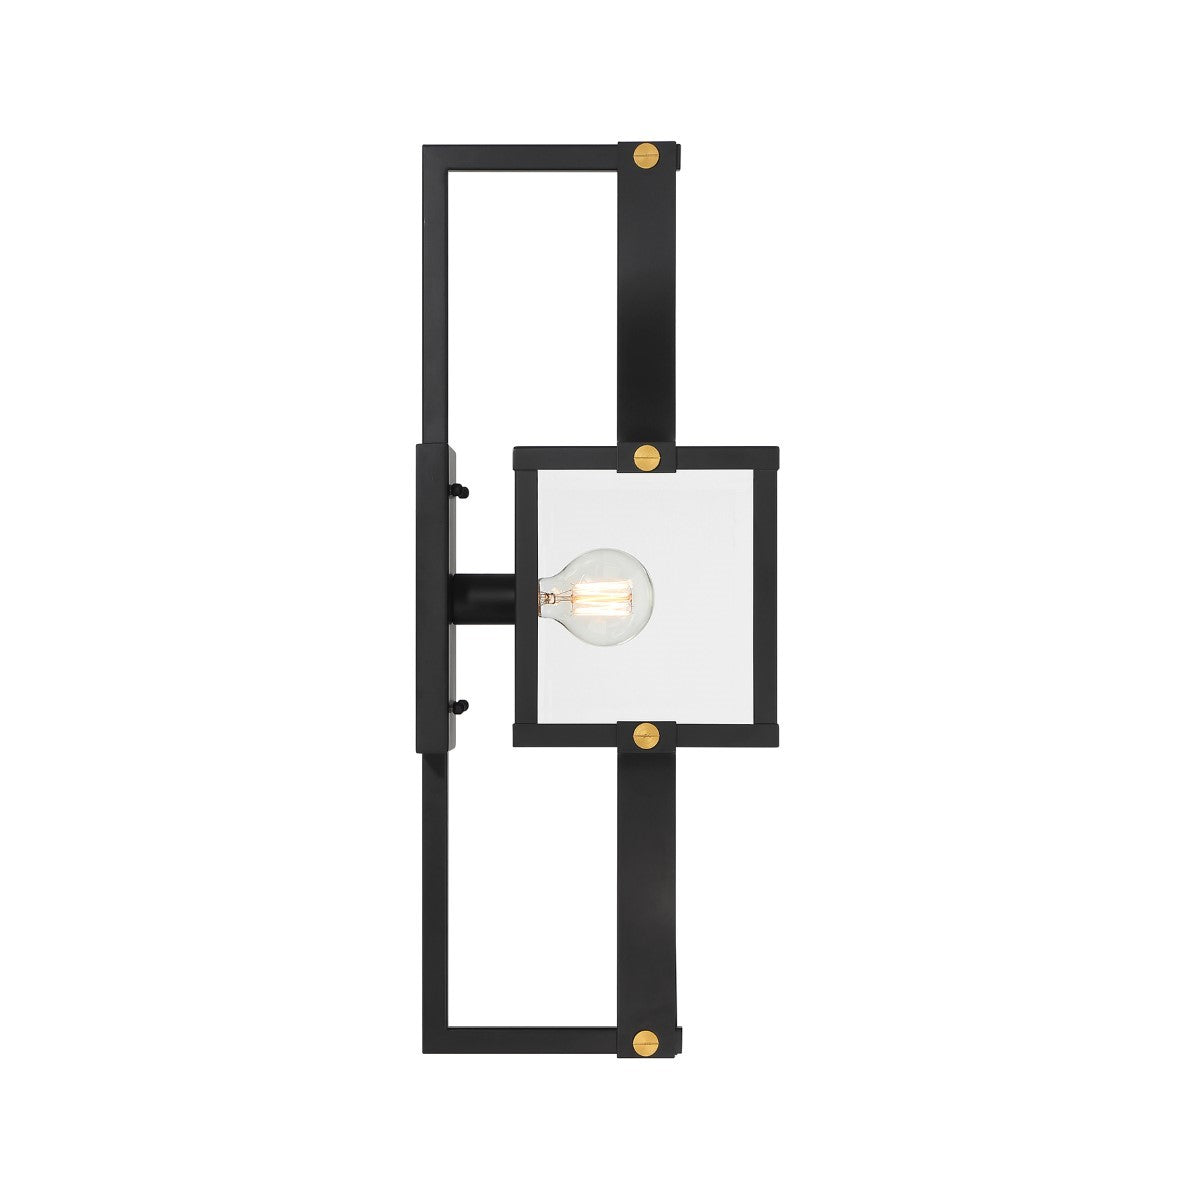 Raeburn 28 in. Outdoor Wall Lantern Matte Black and Weathered Brushed Brass Finish - Bees Lighting